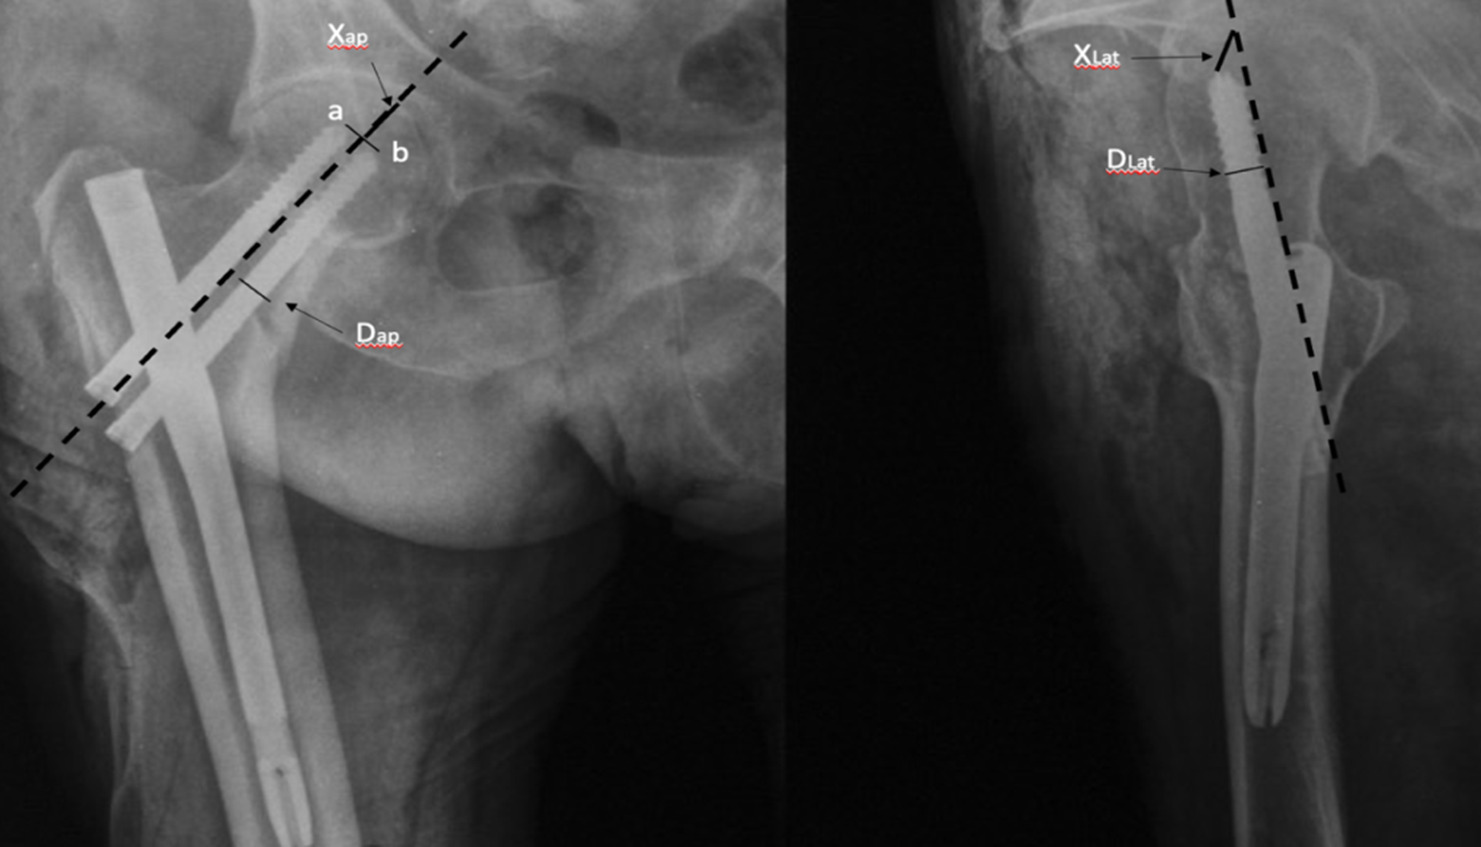 Fig. 1 
            Tip-apex distance in anterior-posterior and lateral views of intertrochanteric femur nailing. “Xap” was measured as the distance from the apex of the femoral head to a midpoint between the tips of the two screws, “Xlat” was the distance between the tips in lateral view and the femoral head, and “Dap” and “Dlat” were the diameter of the screws, respectively, in the two views.
          